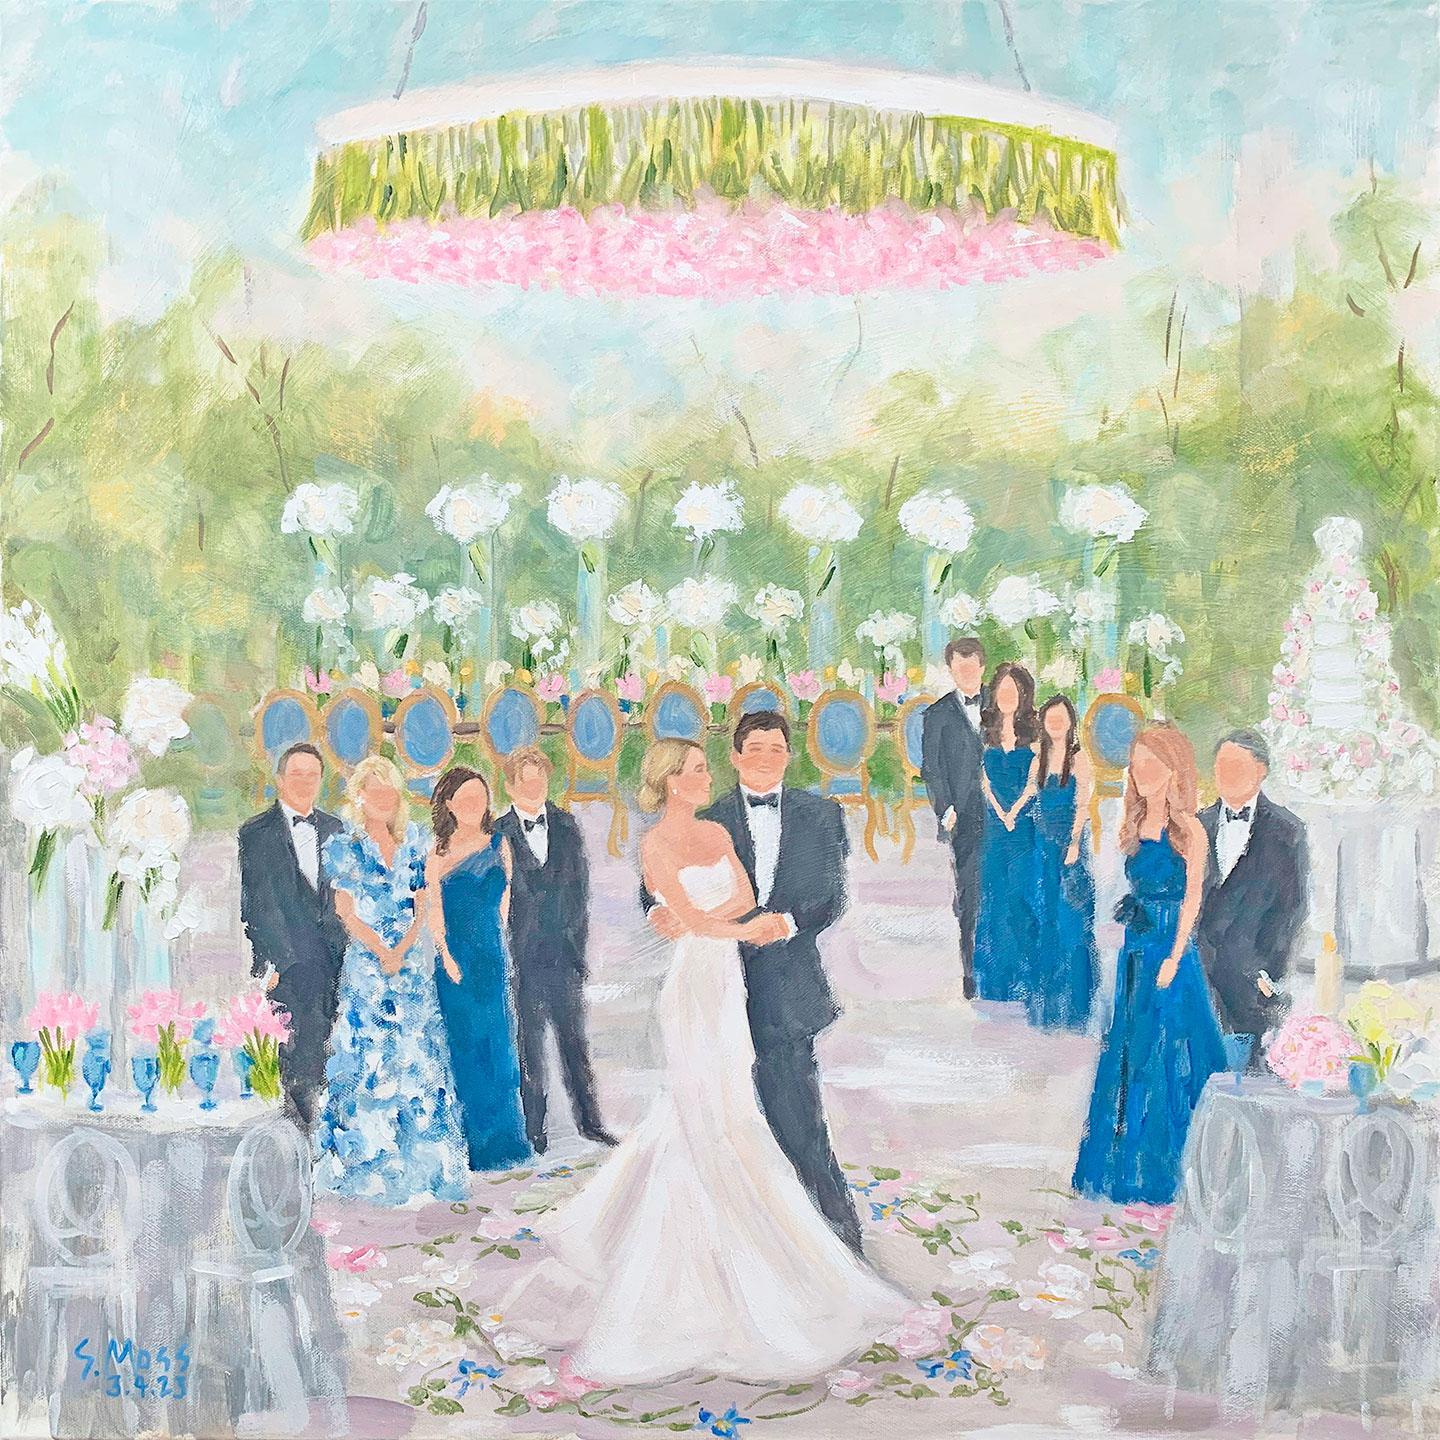 Live Event Wedding Painting of First Dance, by Dallas Artist Susan Moss Cooper at Arlington Hall in Dallas, Texas